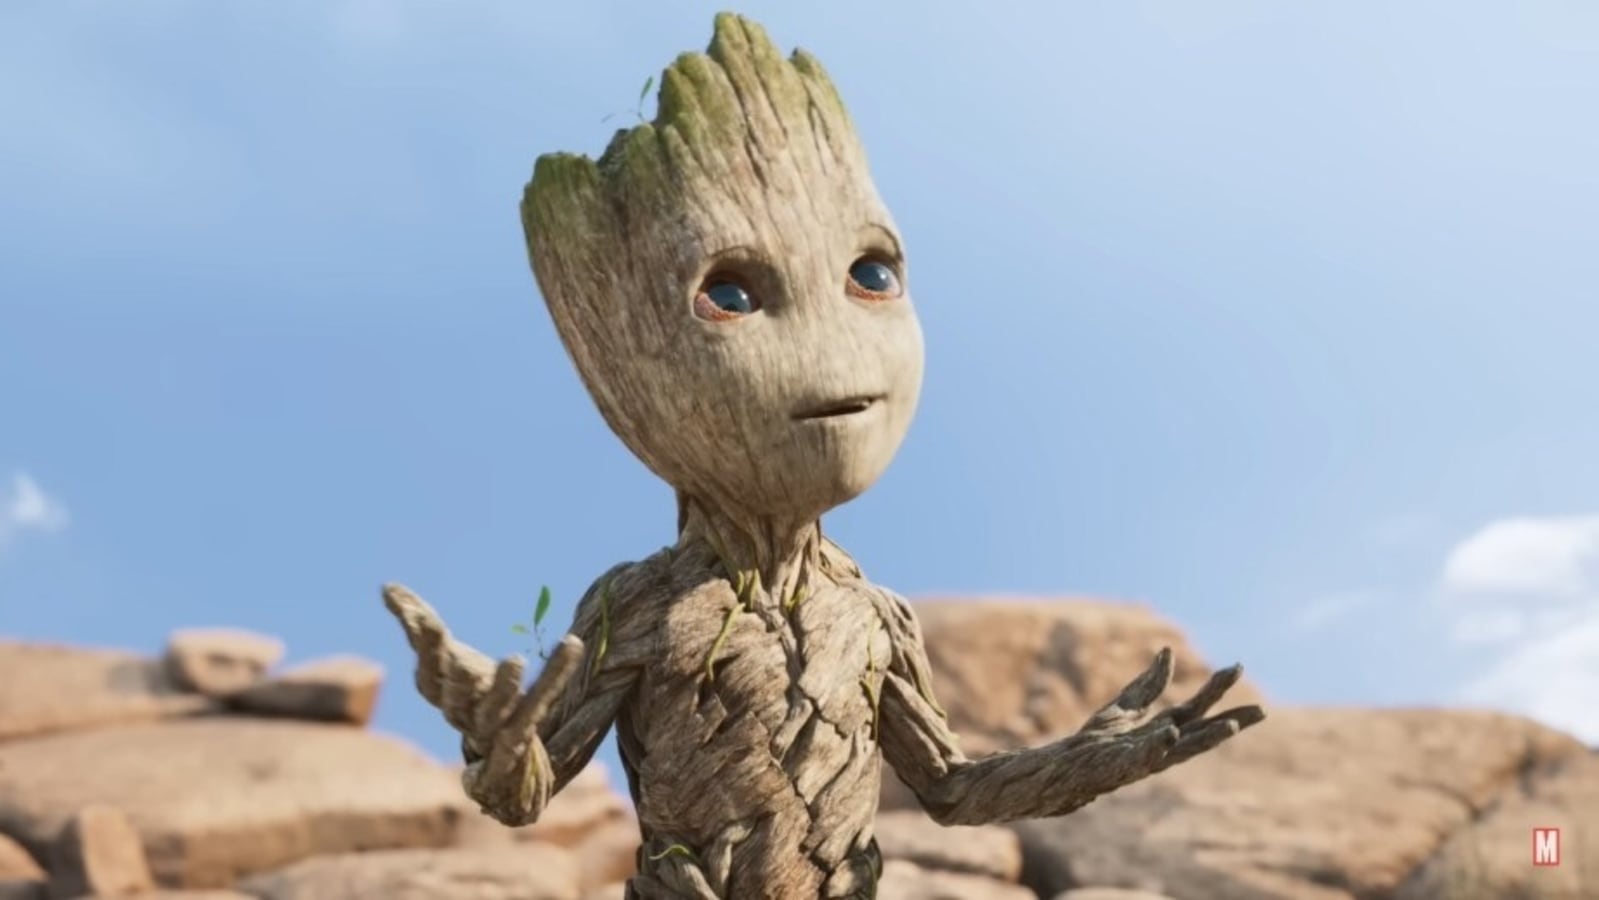 Disney+ Releases 5 Adorable New Posters for Marvel's Groot Spin-off